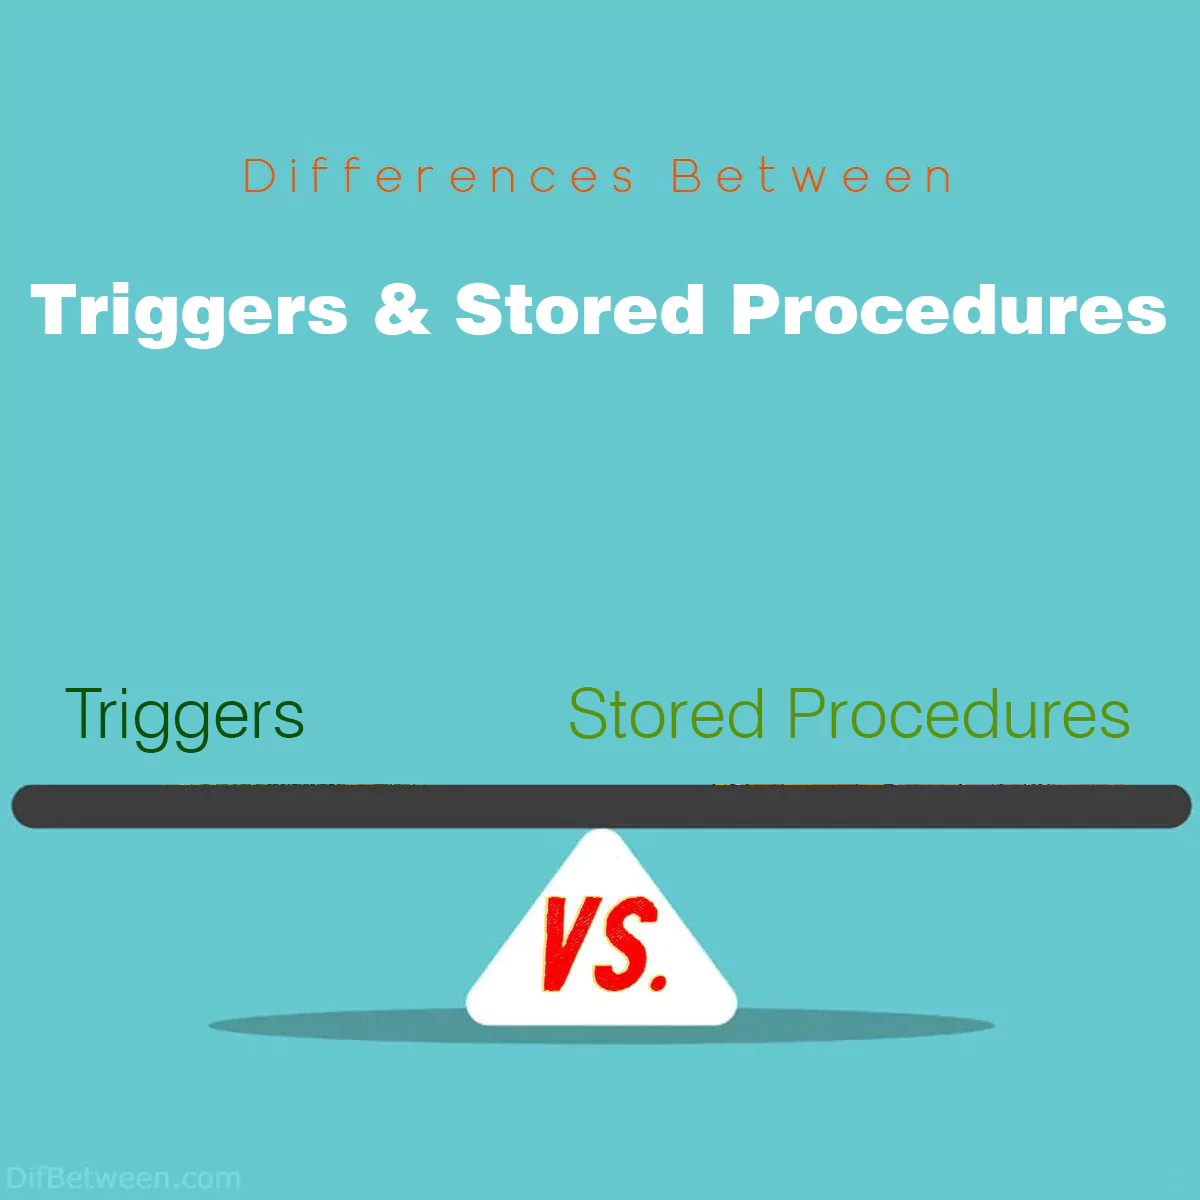 Differences Between Triggers and Stored Procedures